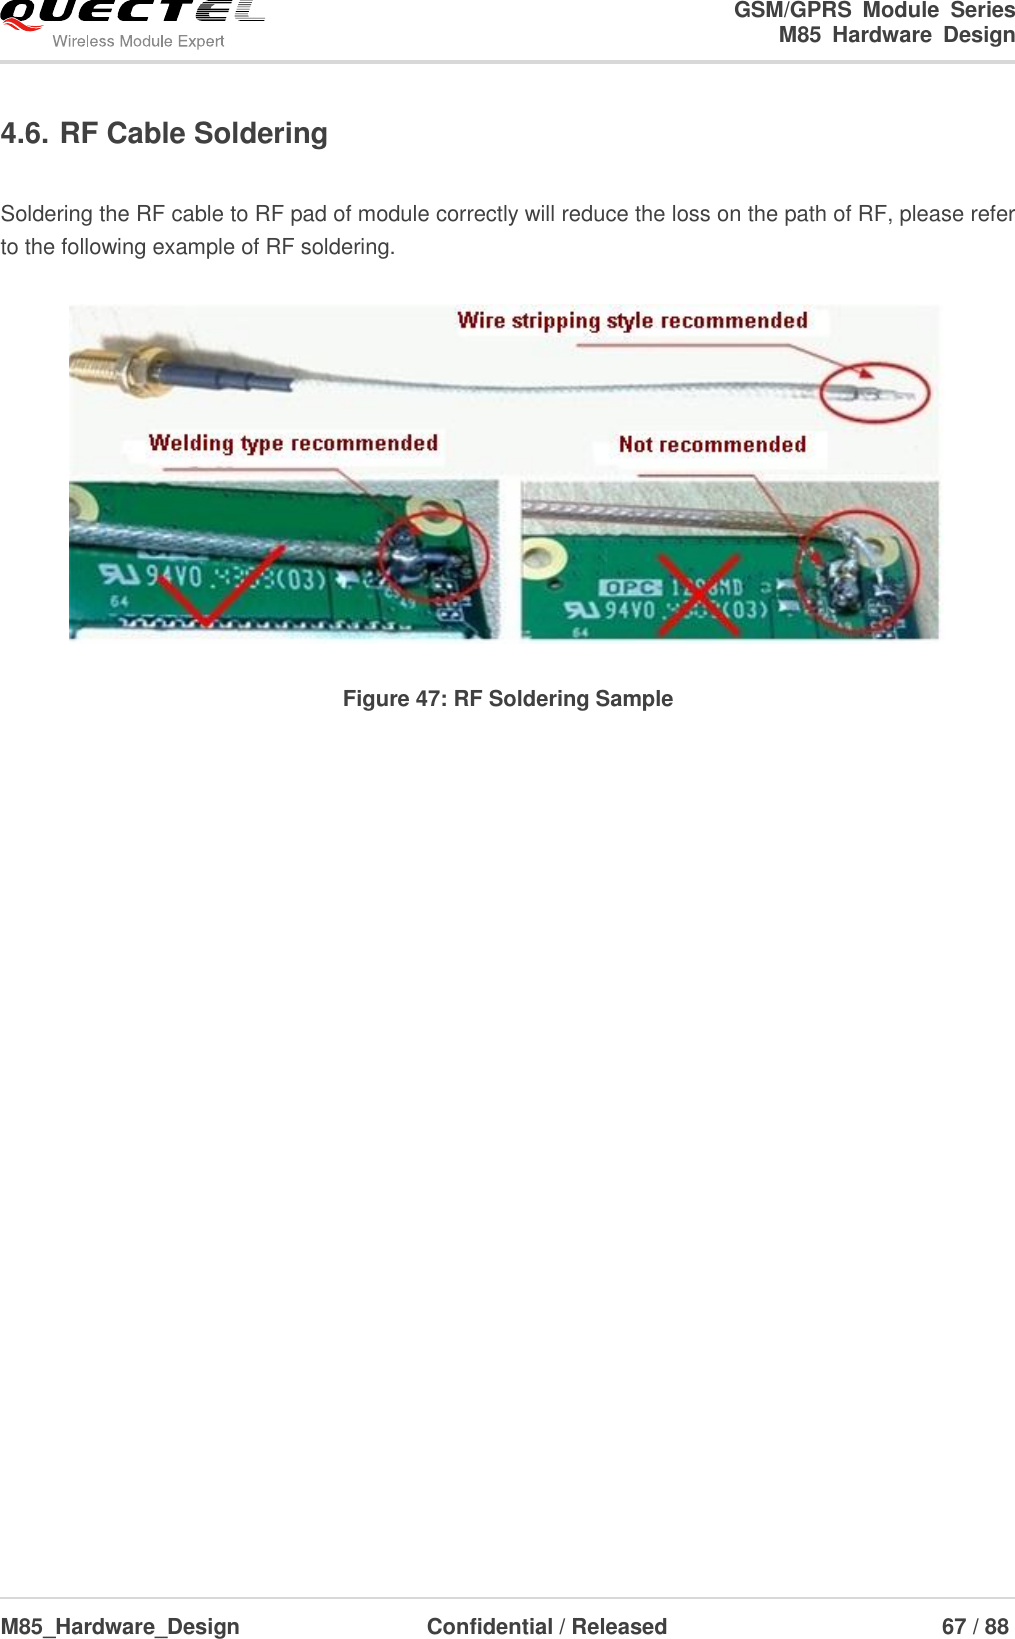                                                                                                                                               GSM/GPRS  Module  Series                                                                 M85  Hardware  Design  M85_Hardware_Design                  Confidential / Released                             67 / 88      4.6. RF Cable Soldering  Soldering the RF cable to RF pad of module correctly will reduce the loss on the path of RF, please refer to the following example of RF soldering.   Figure 47: RF Soldering Sample   